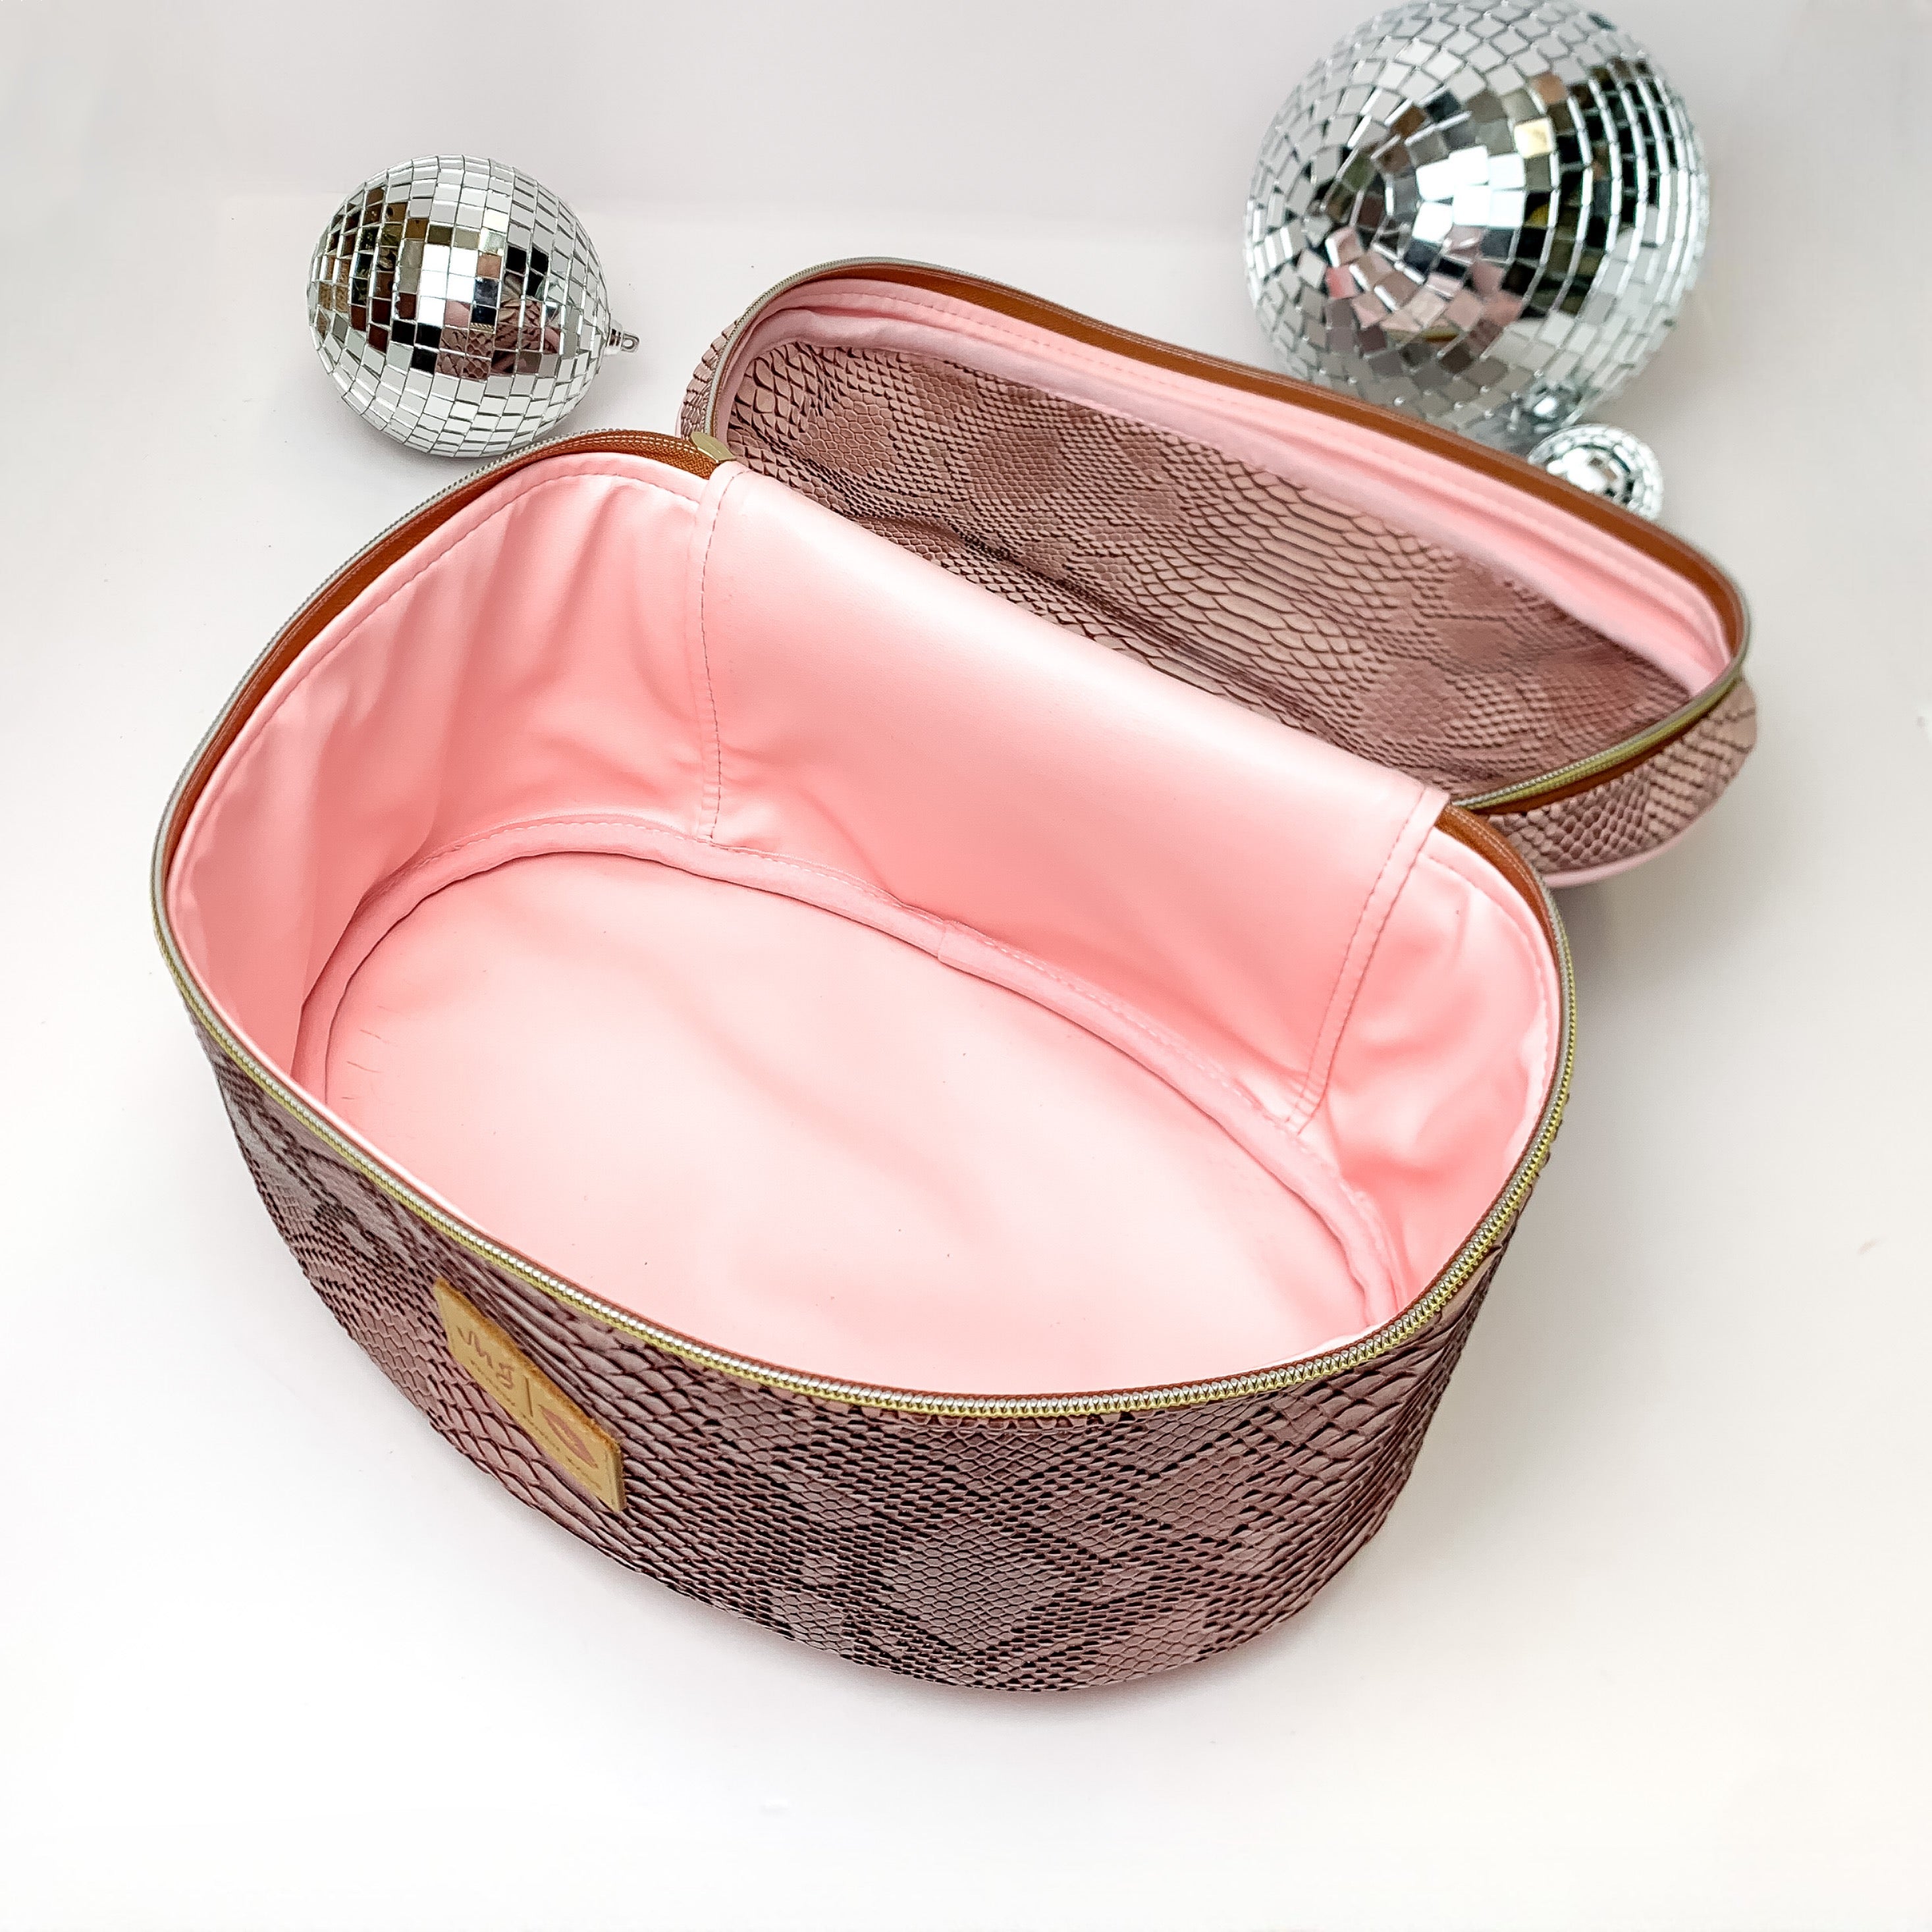 Makeup Junkie | Large Copperazzi Train Case in Dusty Pink Snake Print - Giddy Up Glamour Boutique